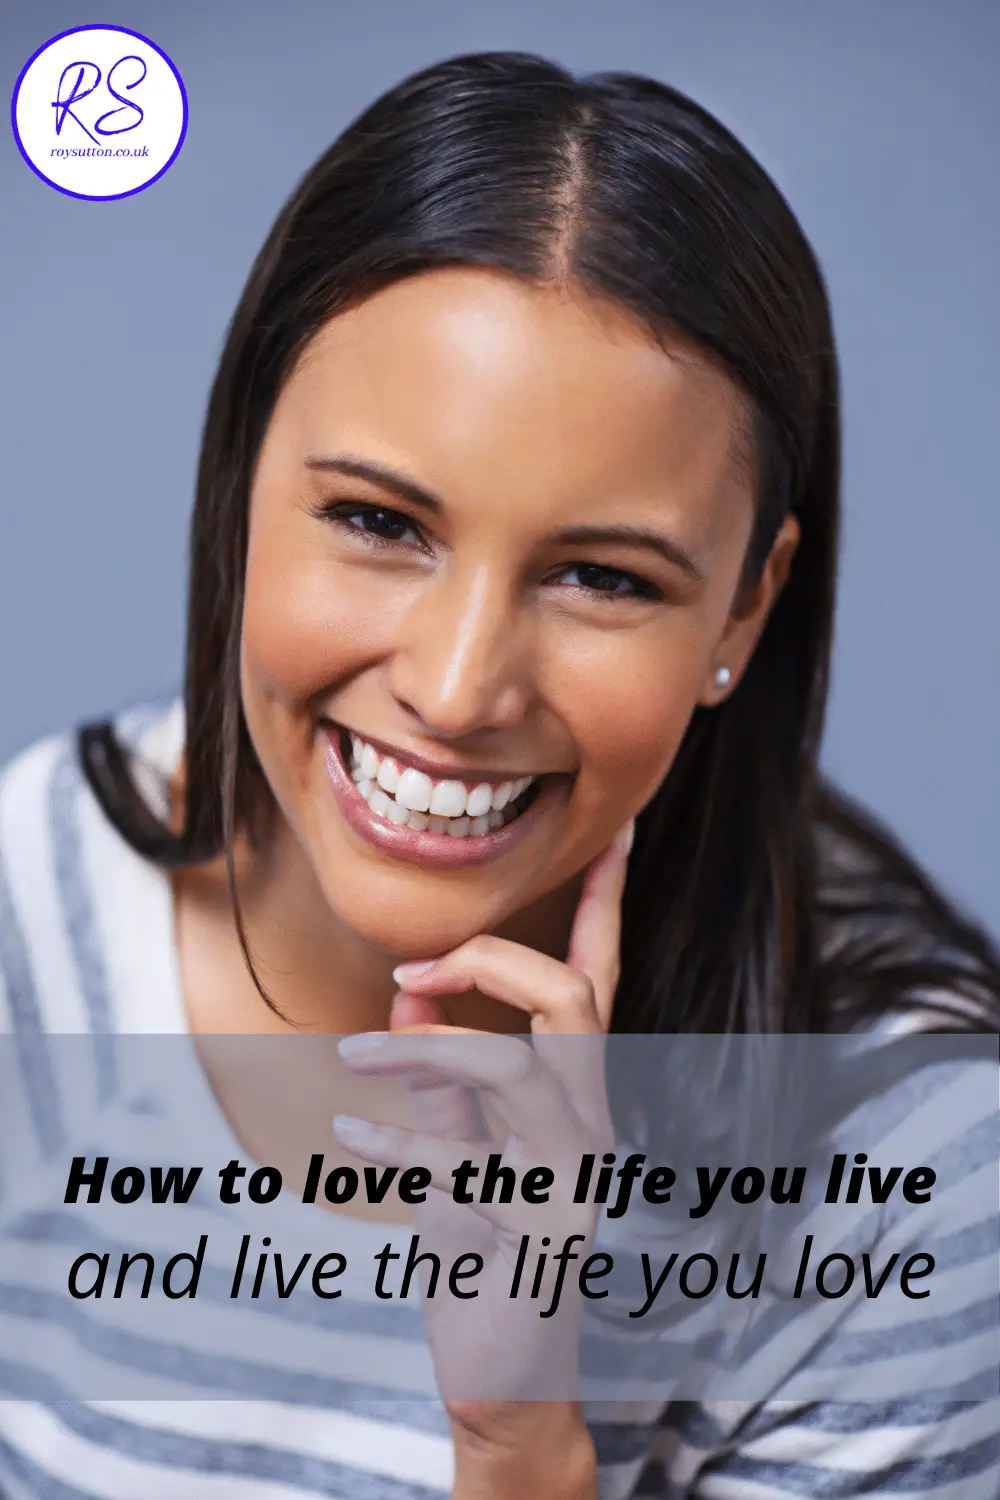 How to love the life you live and live the life you love - Roy Sutton